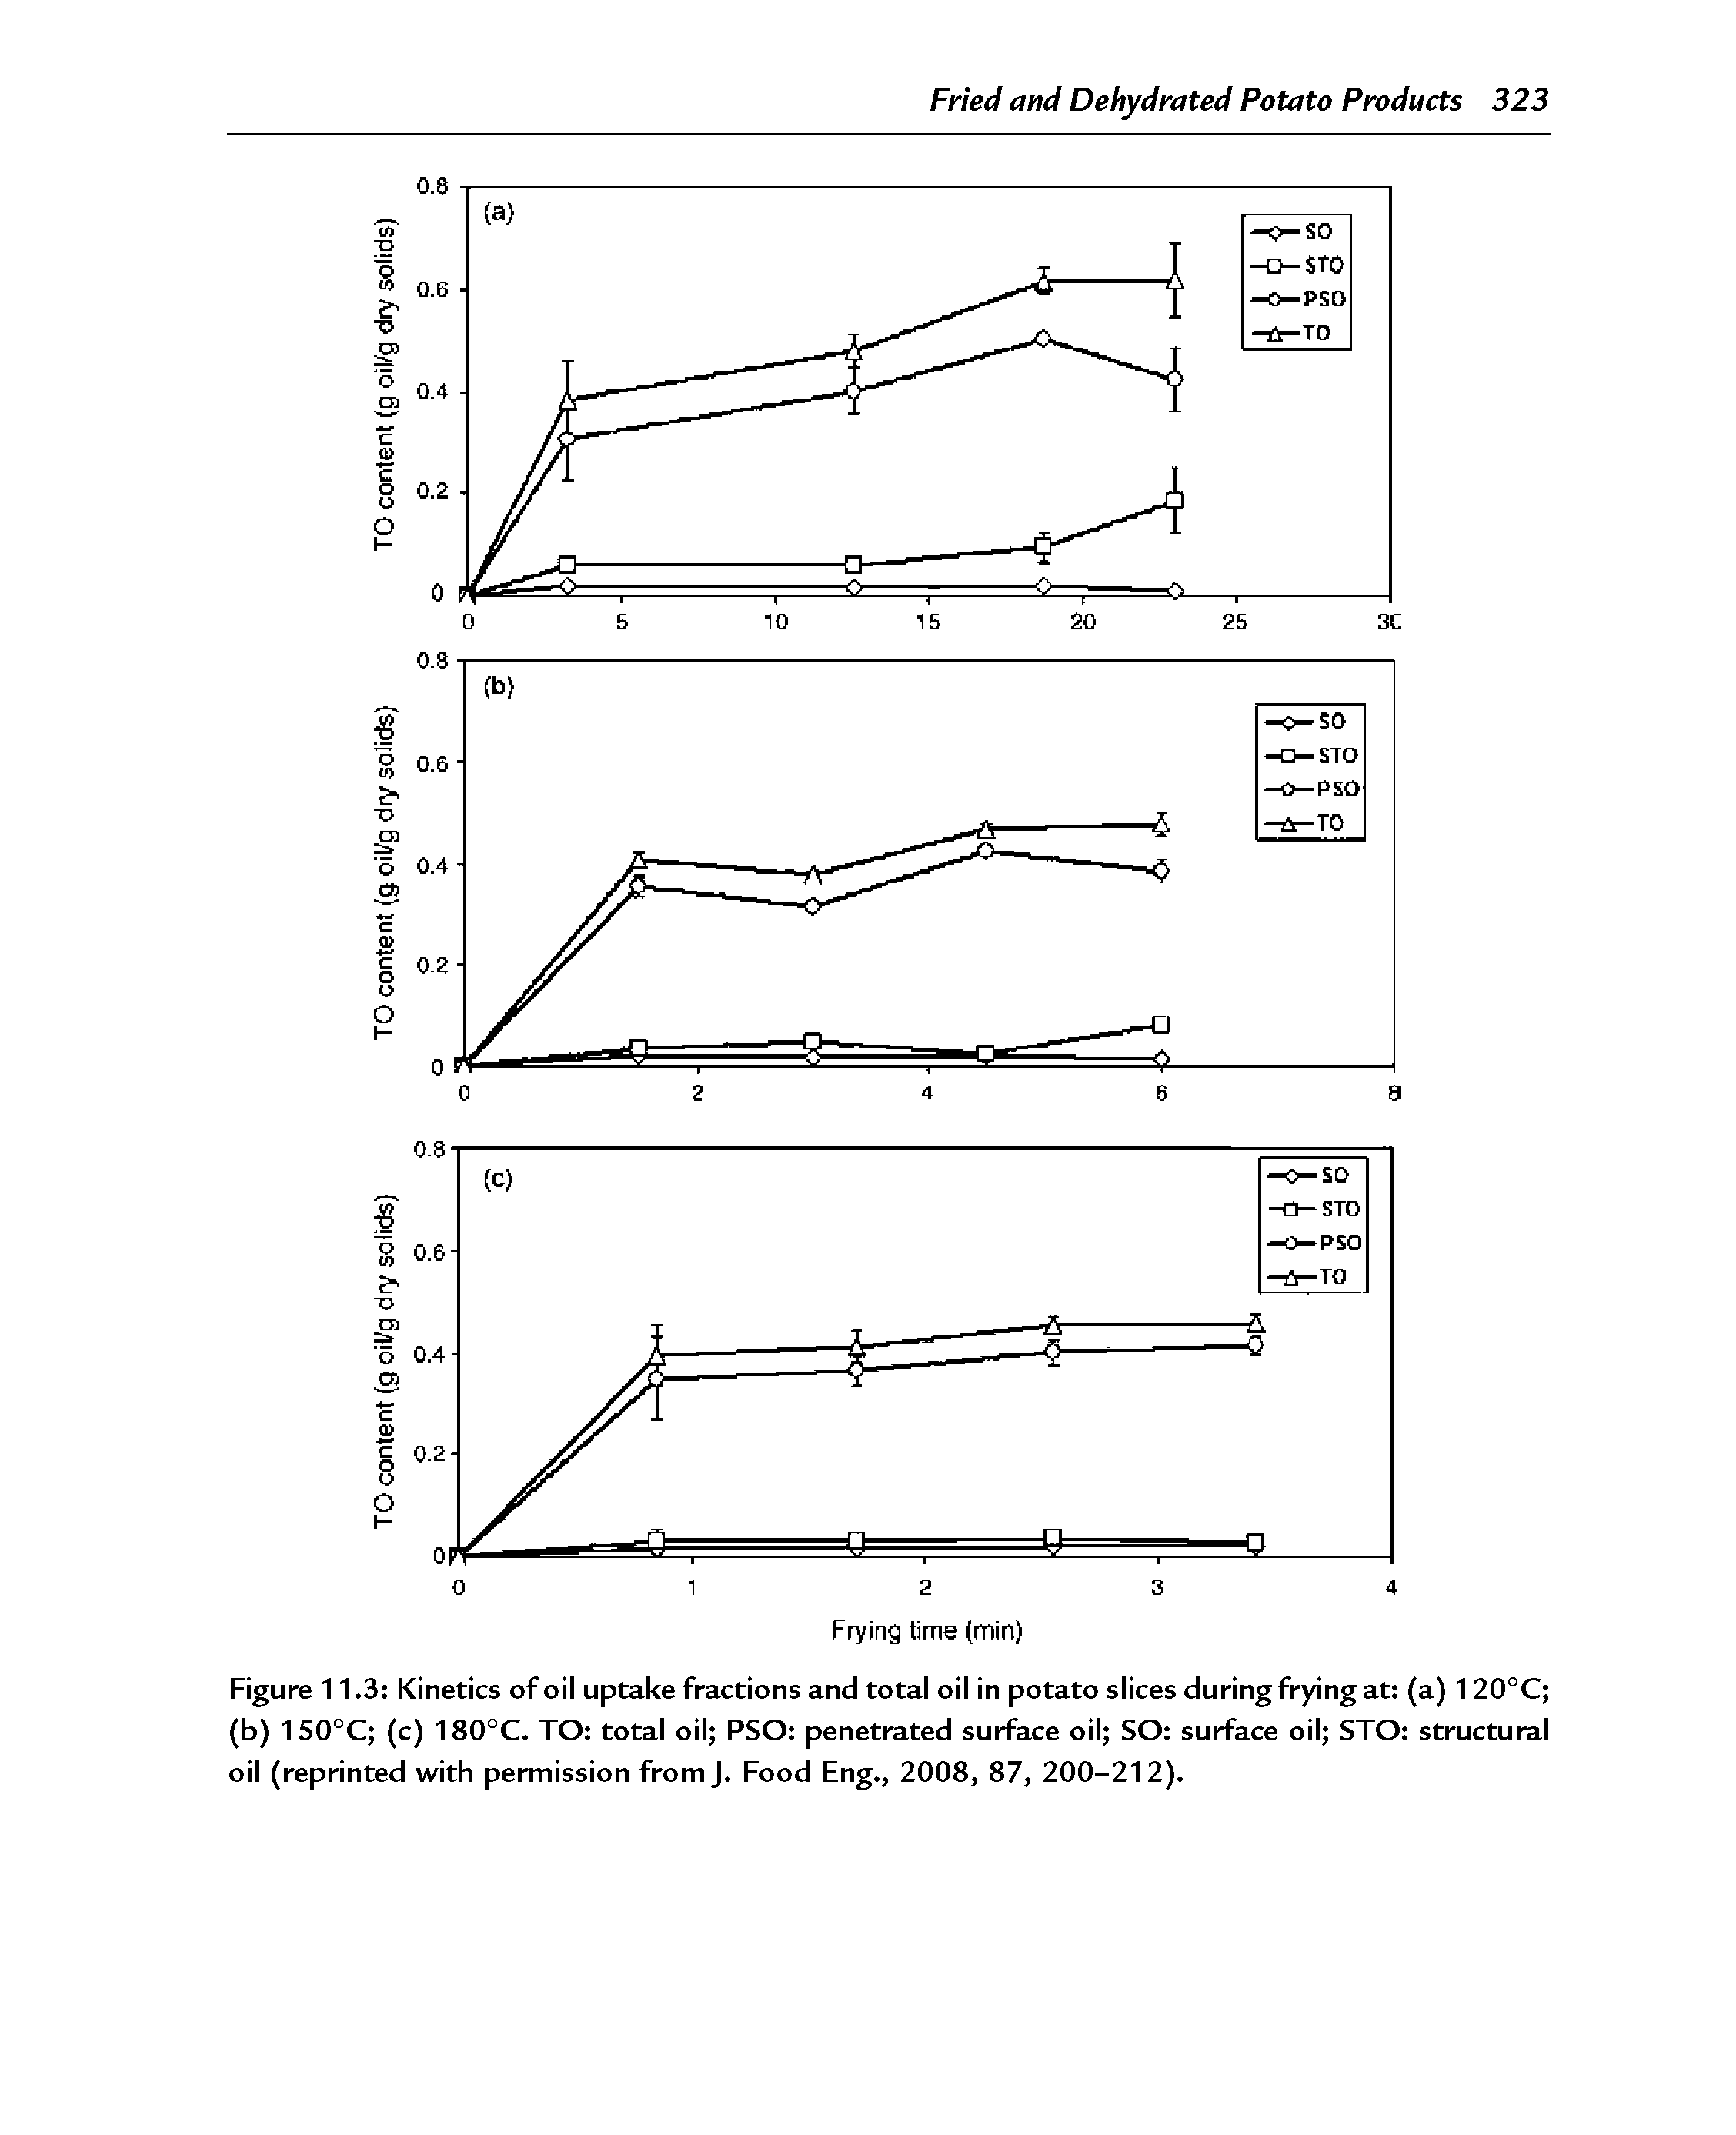 Figure 11.3 Kinetics of oil uptake fractions and total oil in potato slices during frying at (a) 1 20°C (b) 150°C (c) 180°C. TO total oil PSO penetrated surface oil SO surface oil STO structural oil (reprinted with permission fromj. Food Eng., 2008, 87, 200-212).